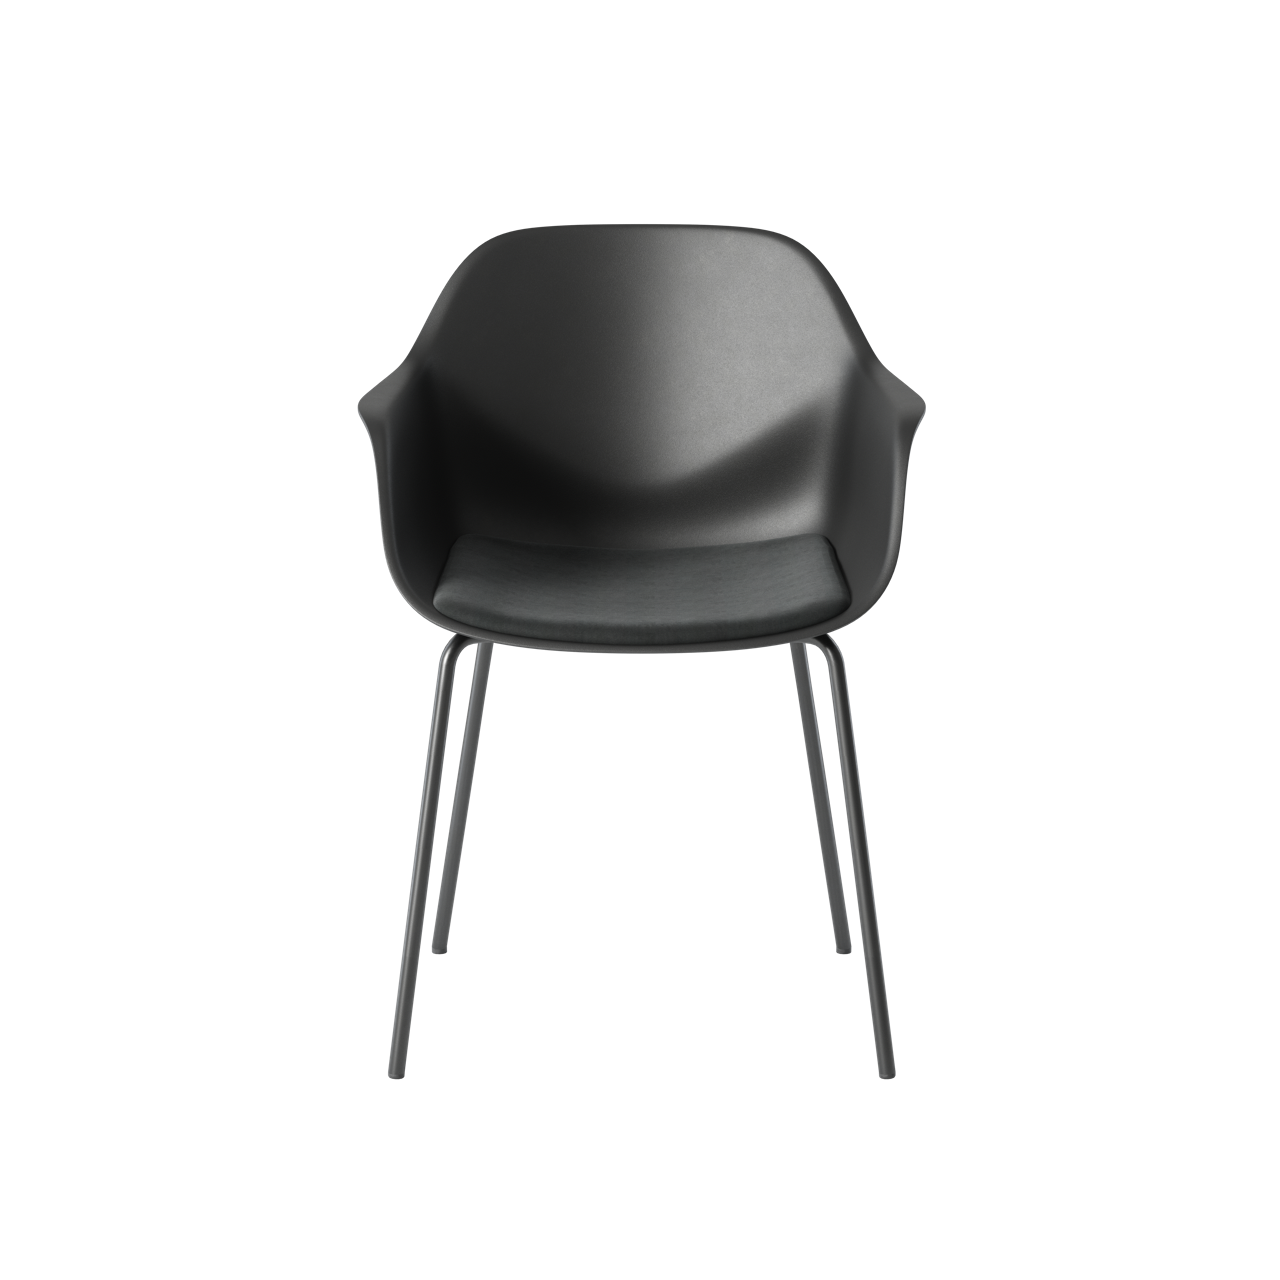 OCEE&FOUR – Chairs – FourMe 44 – Plastic shell - Seat Pad - Packshot Image 4 Large